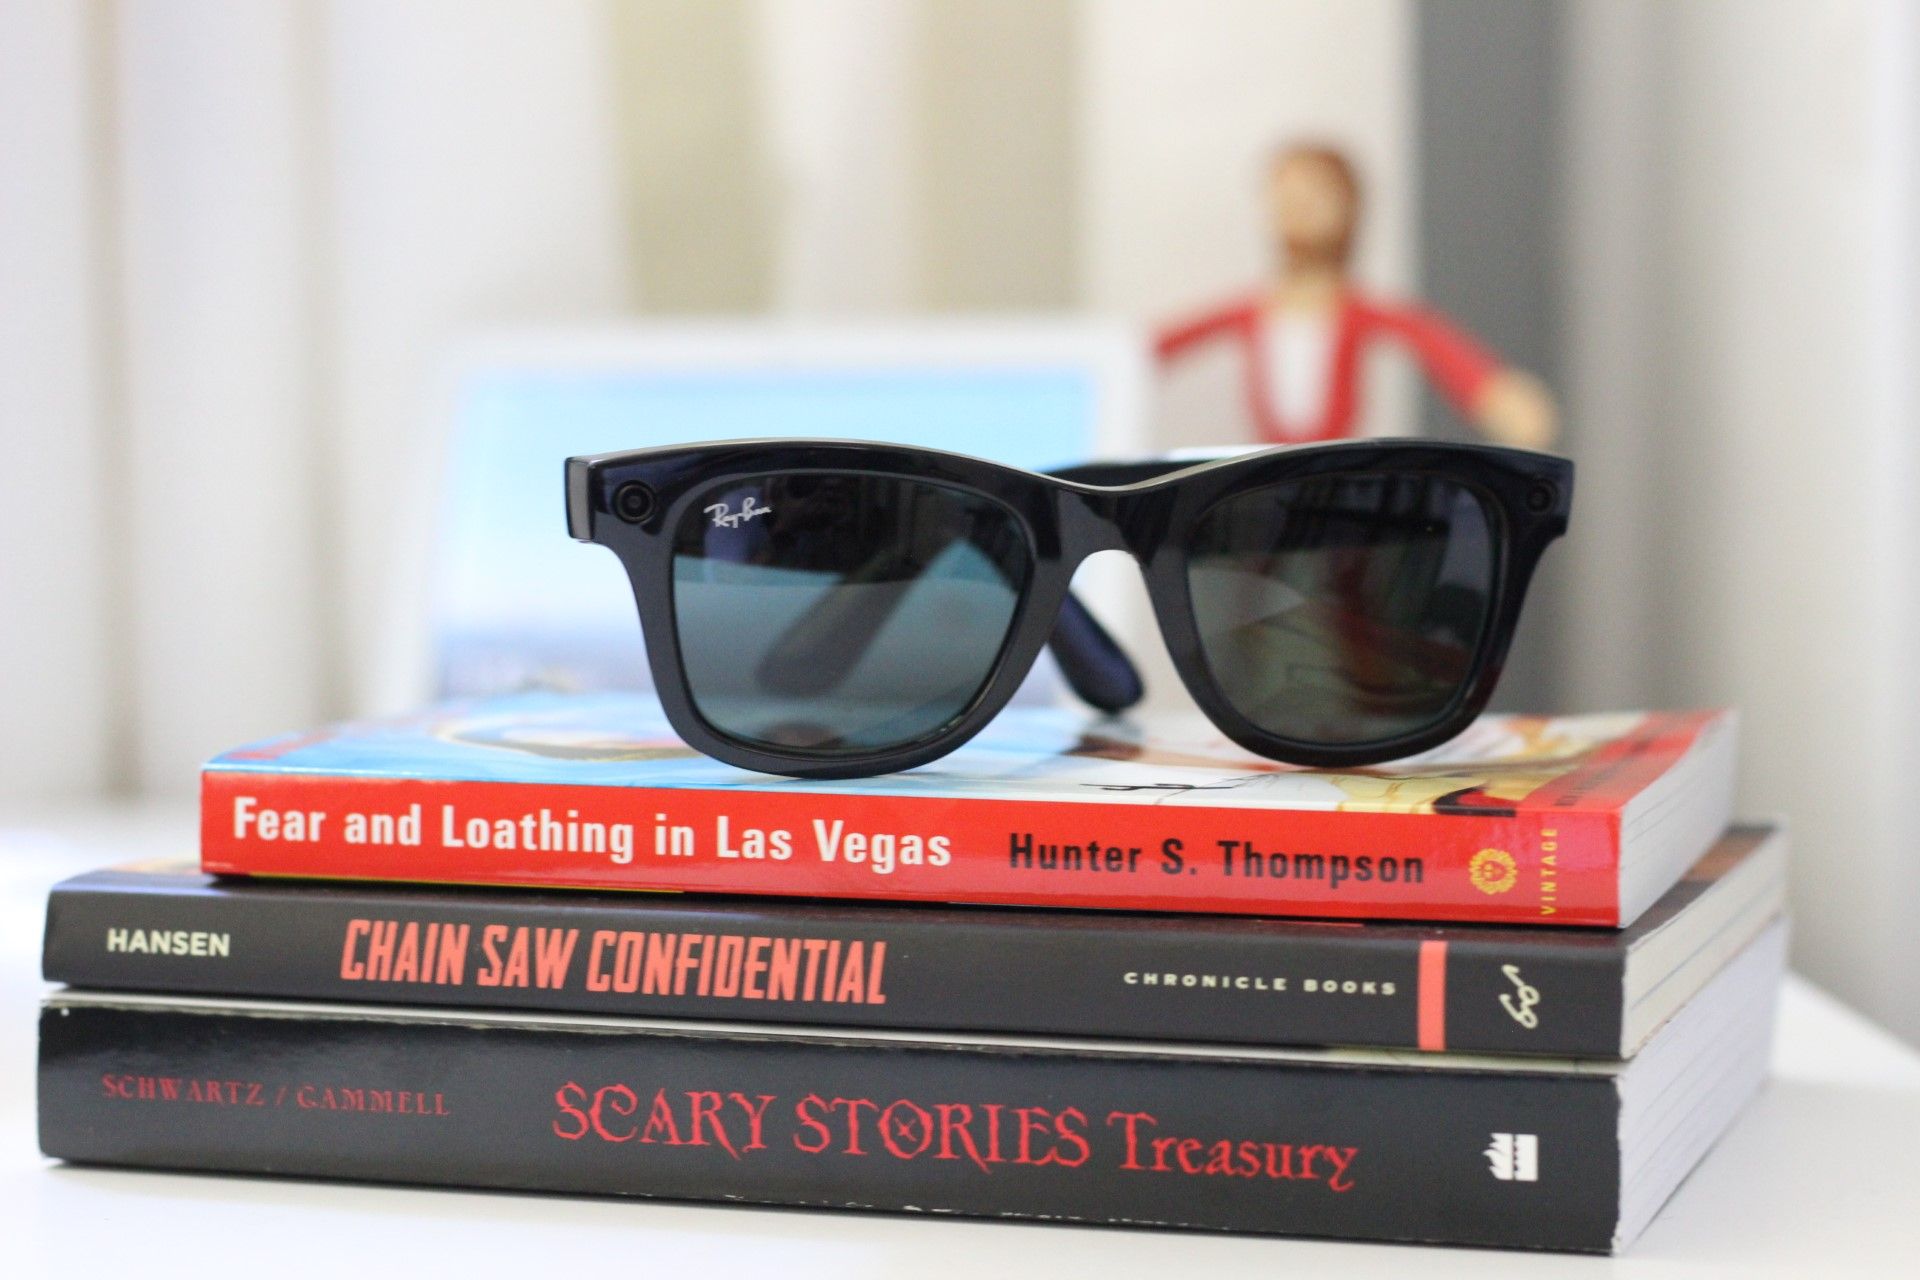 The Ray-Ban Stories on top of a stack of books